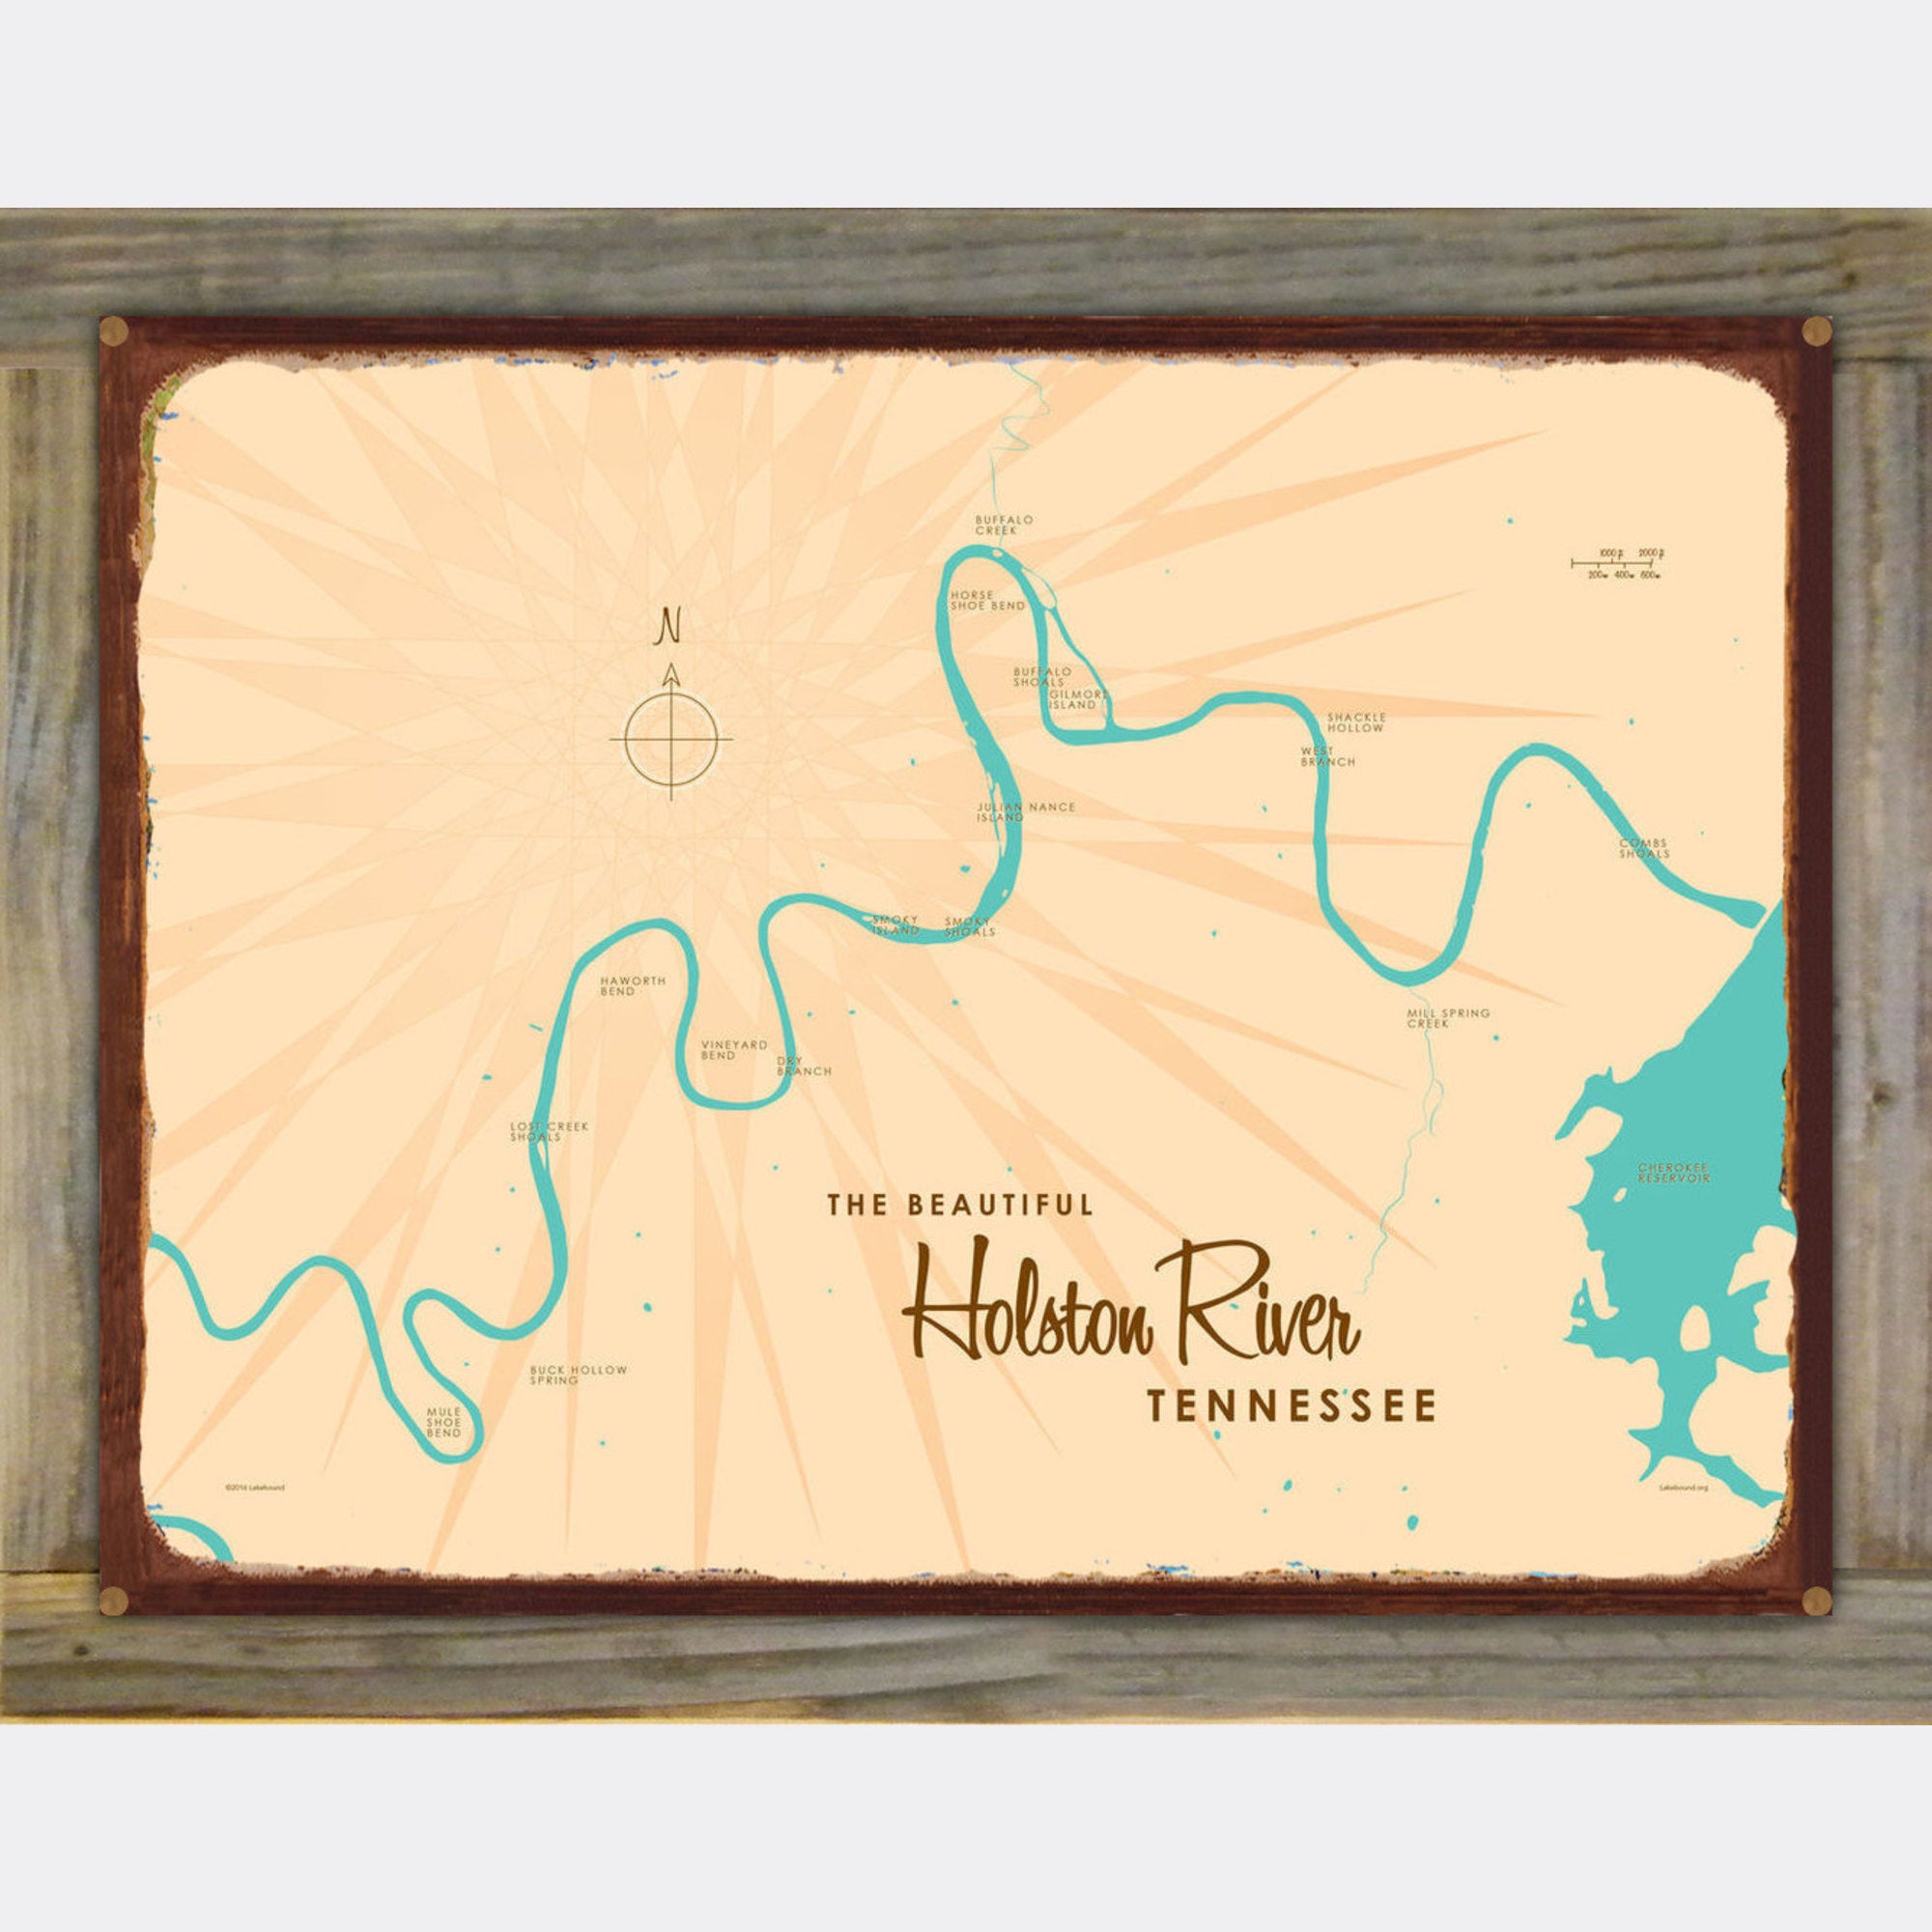 Holston River Tennessee, Wood-Mounted Rustic Metal Sign Map Art